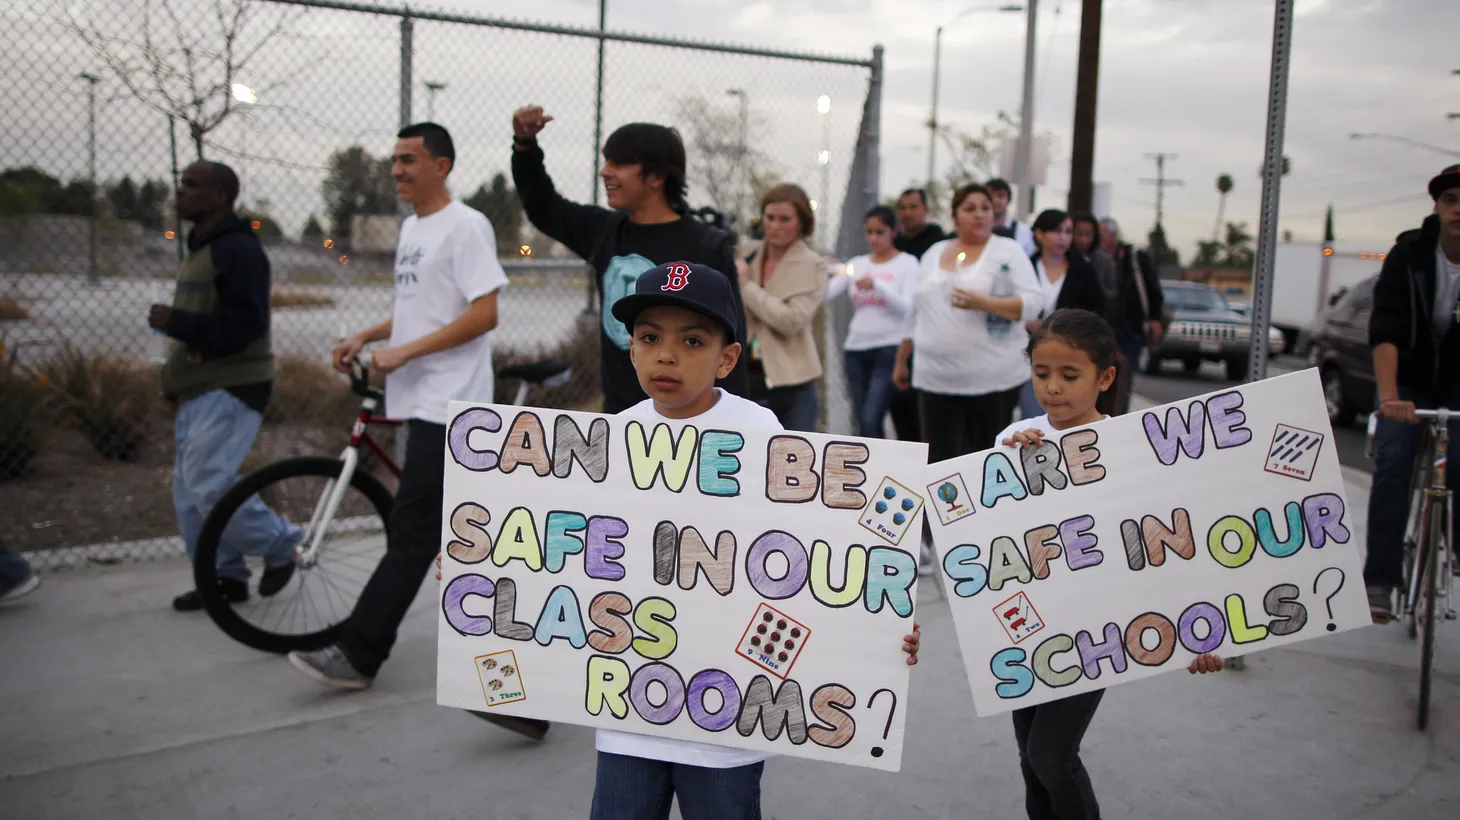 During a march among parents and students of LAUSD’s Miramonte Elementary School, children carry signs that say, “Can we be safe in our classrooms?” and “Are we safe in our schools?”